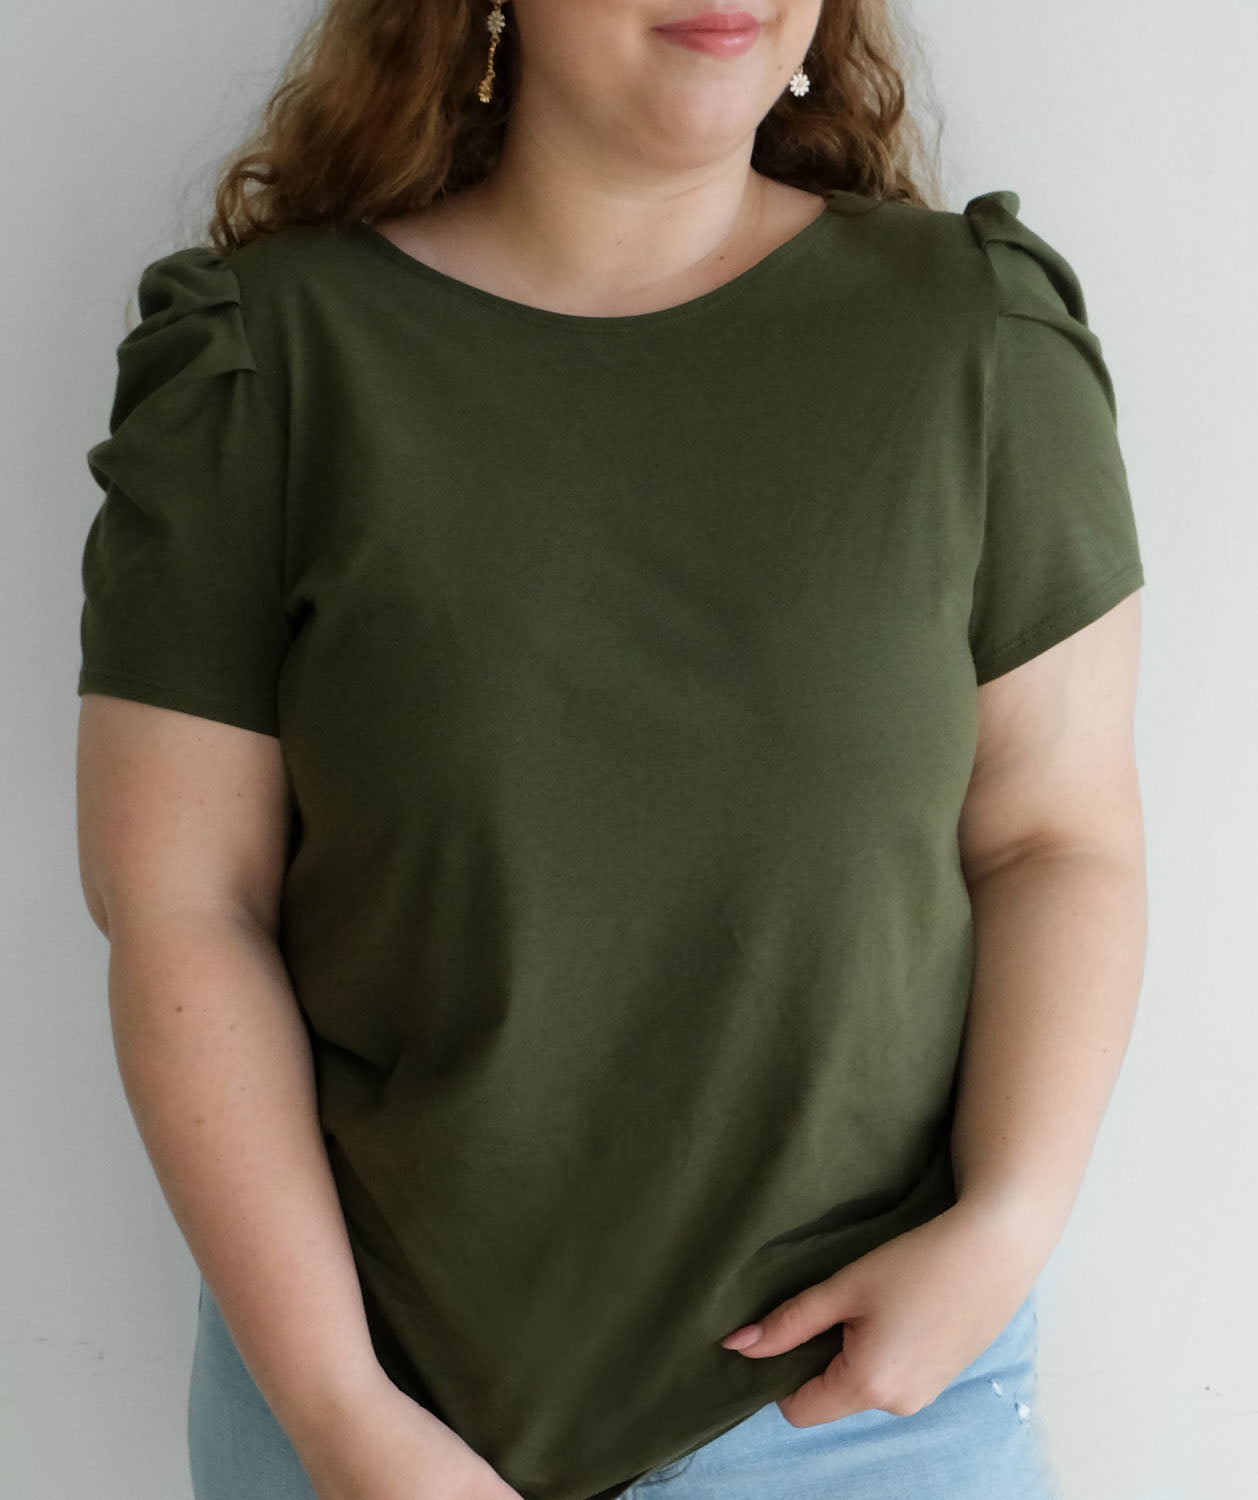 NOLITA tee in Olive <br/>FREE WITH ANY PURCHASE